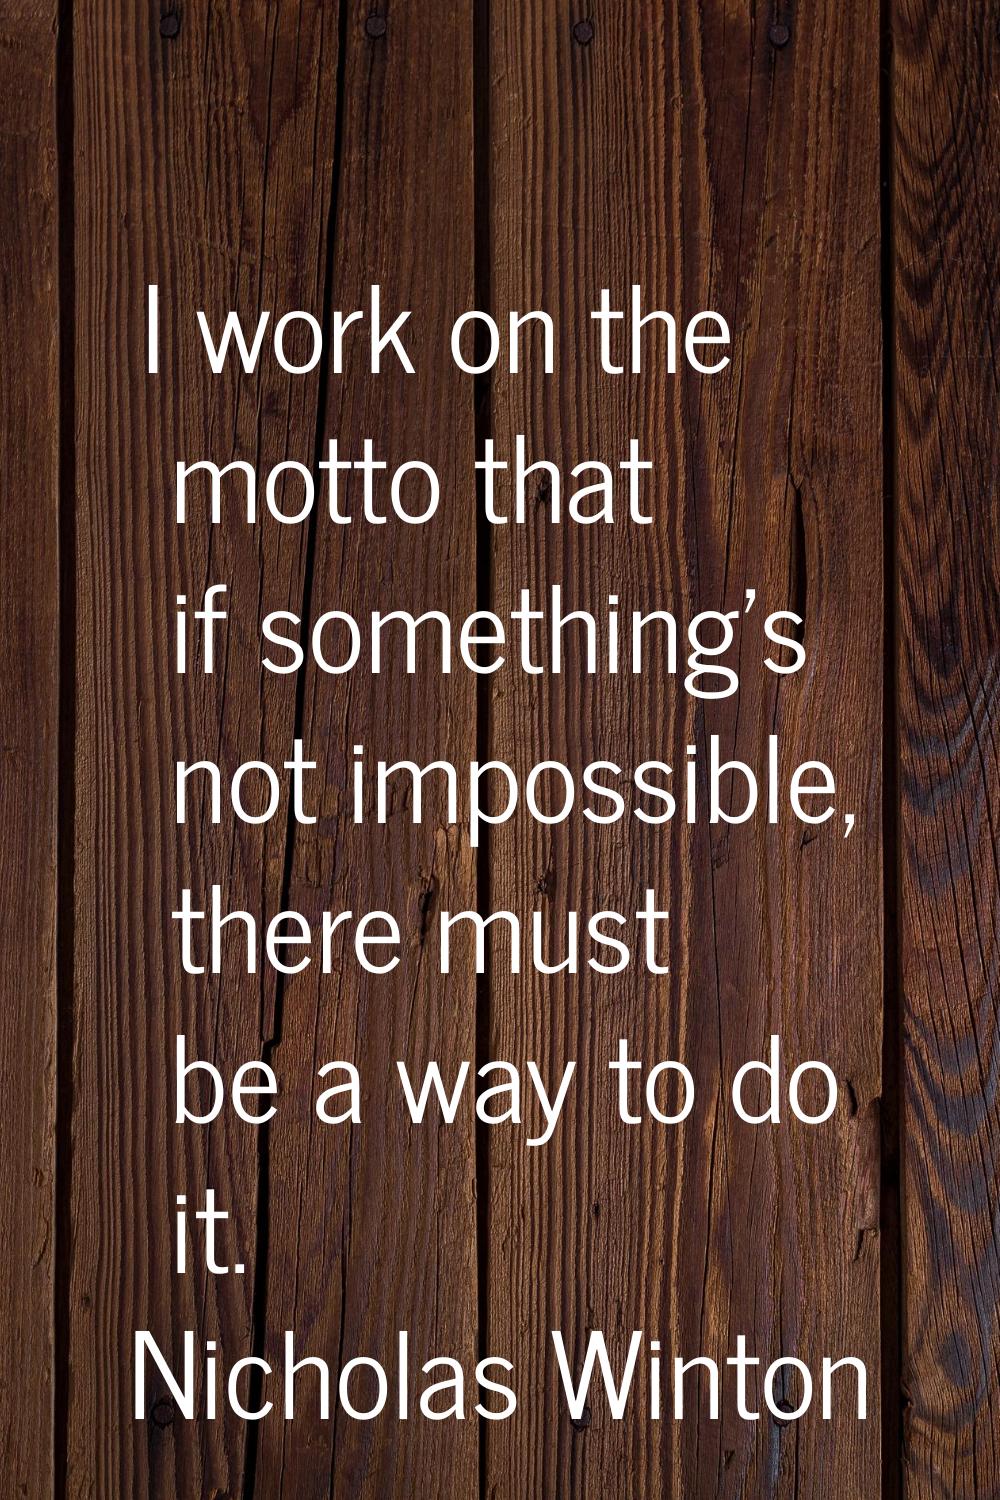 I work on the motto that if something's not impossible, there must be a way to do it.